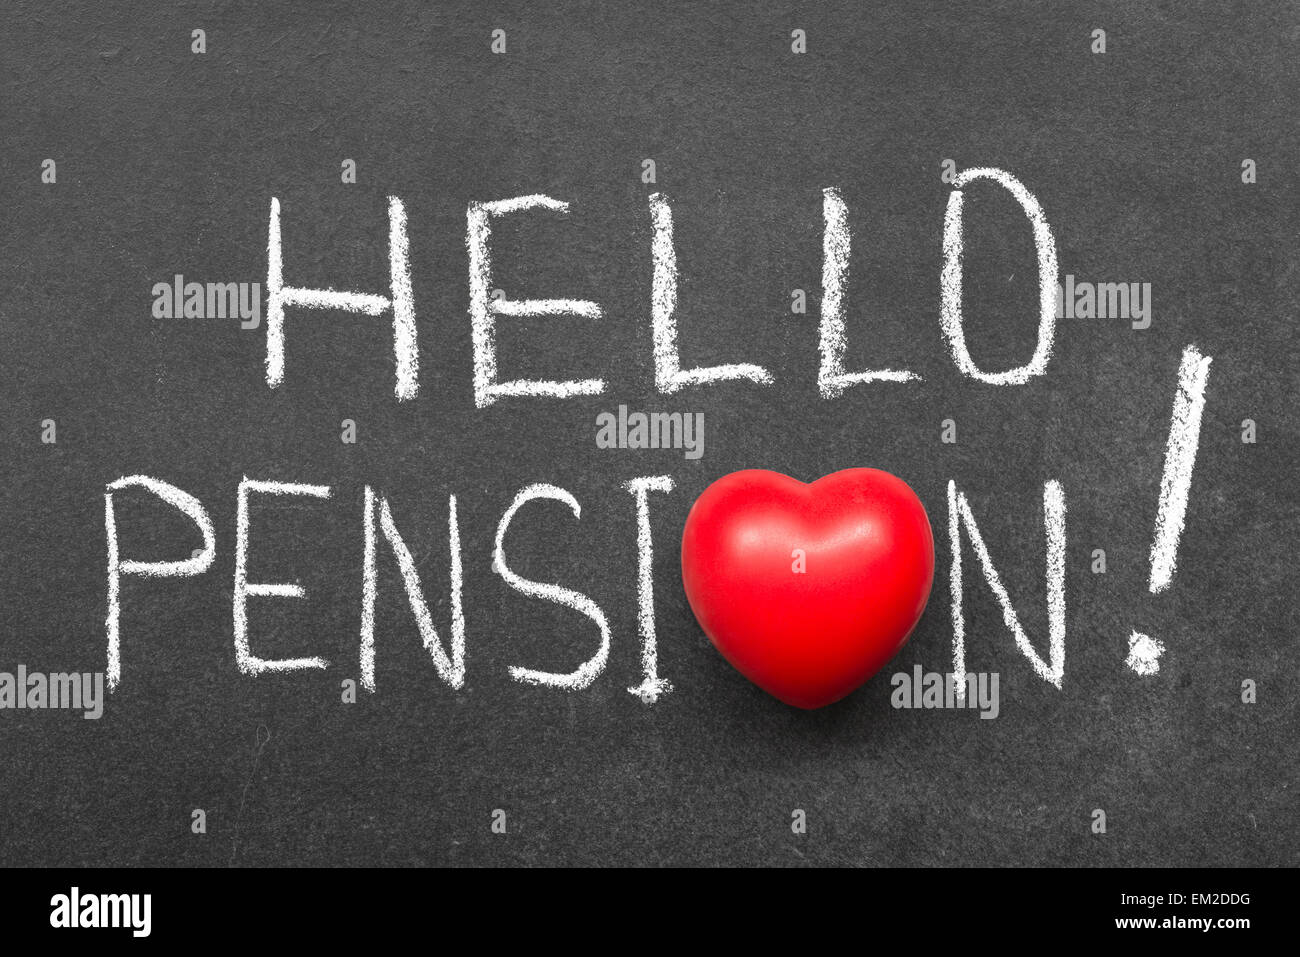 hello pension exclamation handwritten on chalkboard with heart symbol instead of O Stock Photo